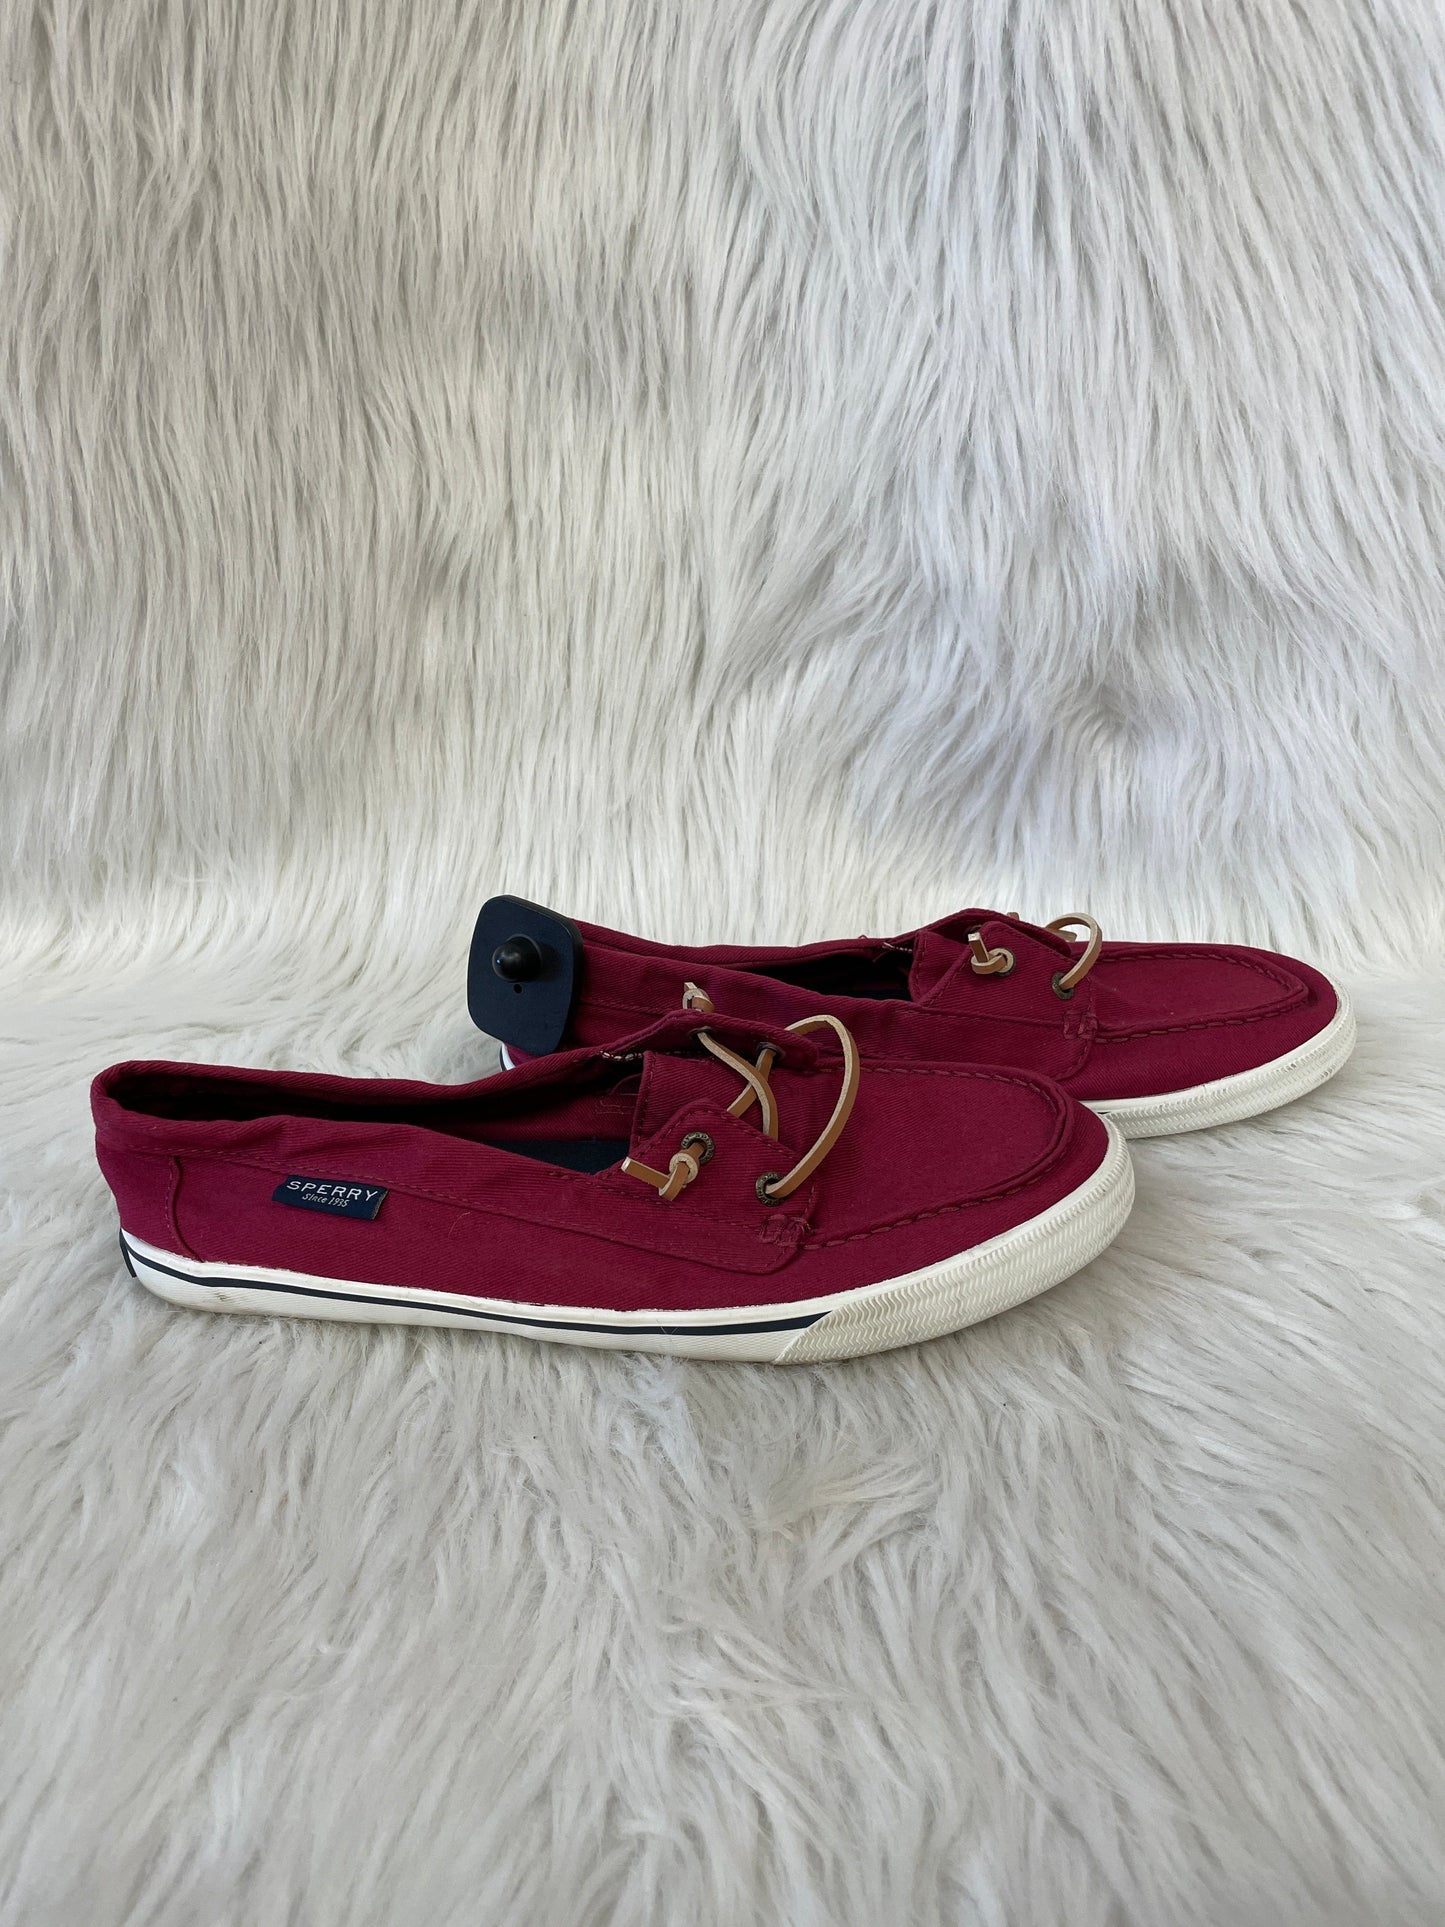 Red Shoes Sneakers Sperry, Size 10